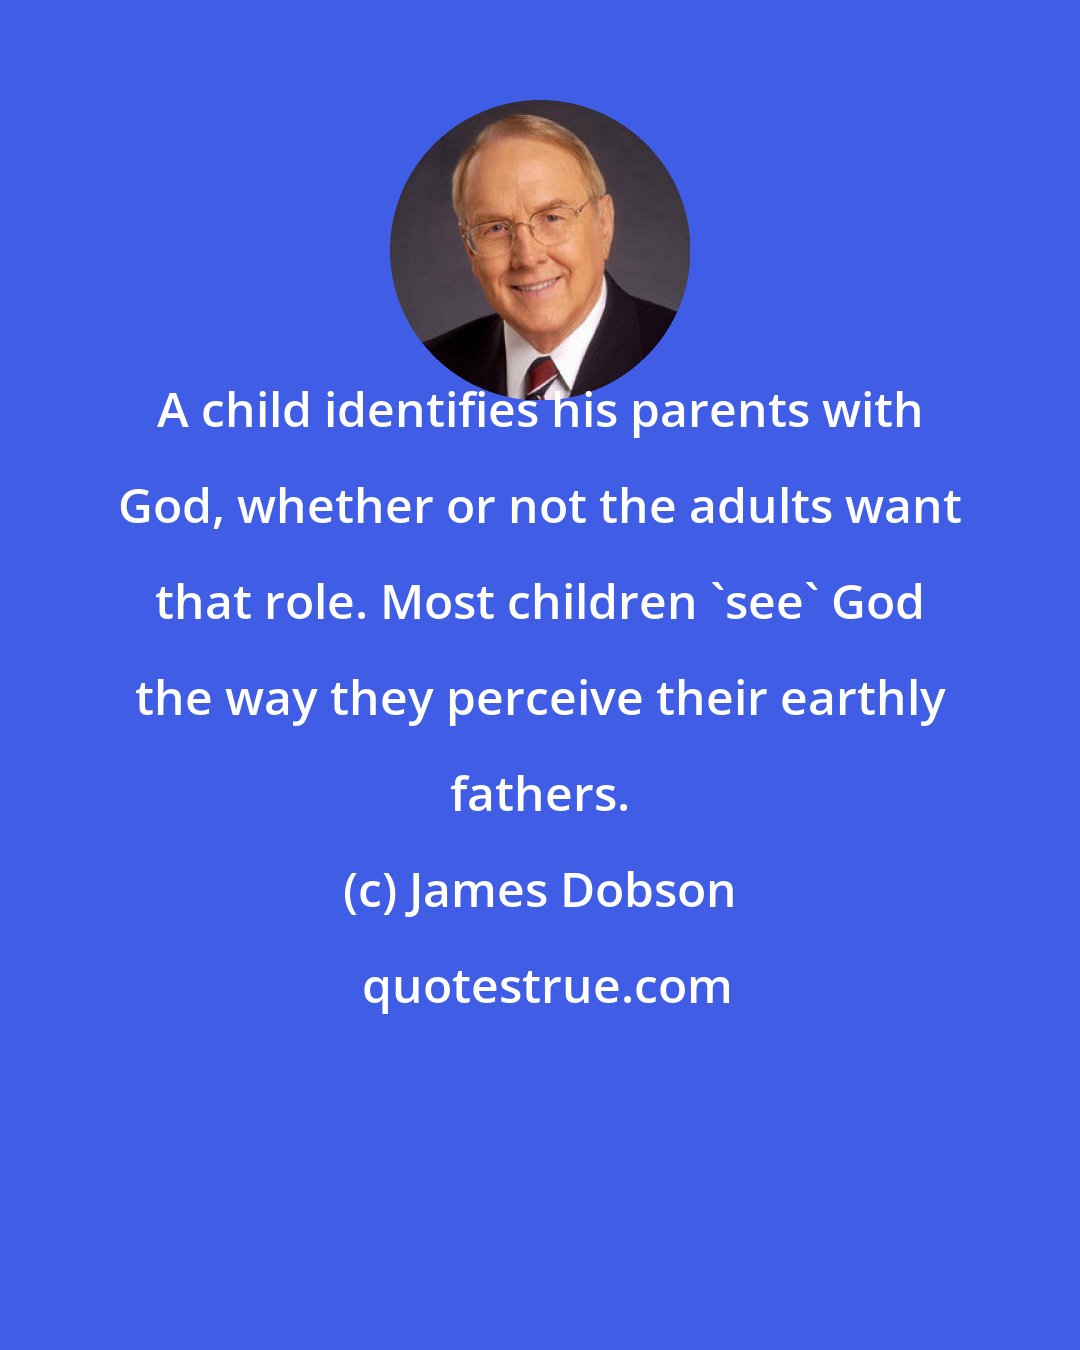 James Dobson: A child identifies his parents with God, whether or not the adults want that role. Most children 'see' God the way they perceive their earthly fathers.